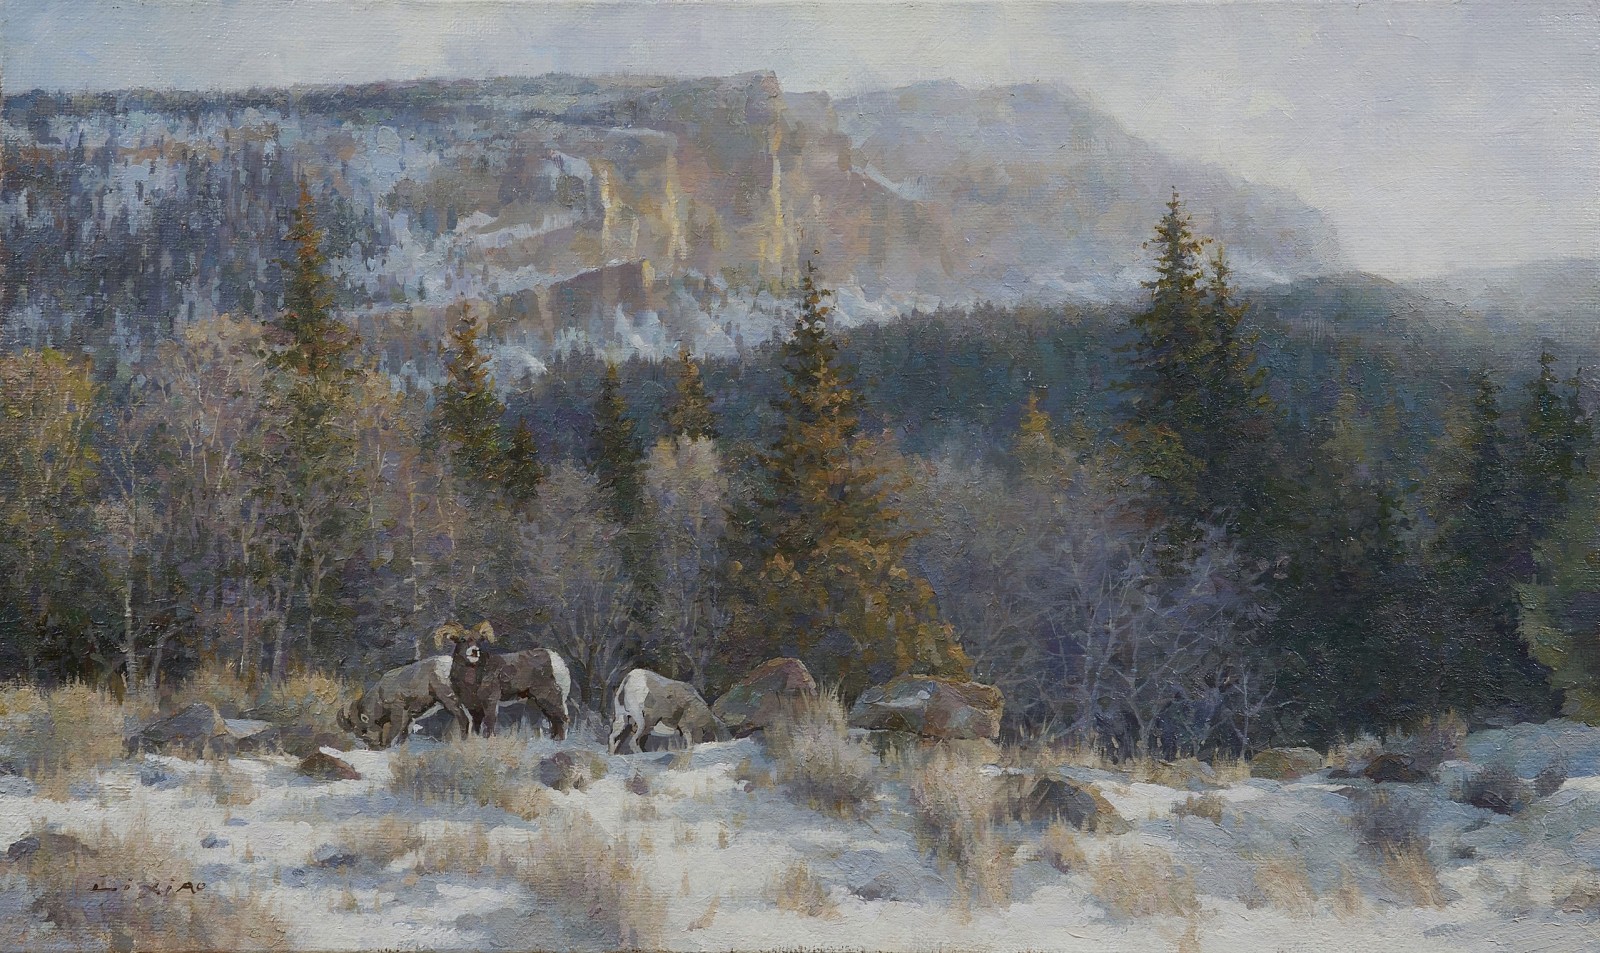 Li Xiao, Snow Scene in the Canyon, 2022
oil on canvas, 18 x 30 in.
LX042201